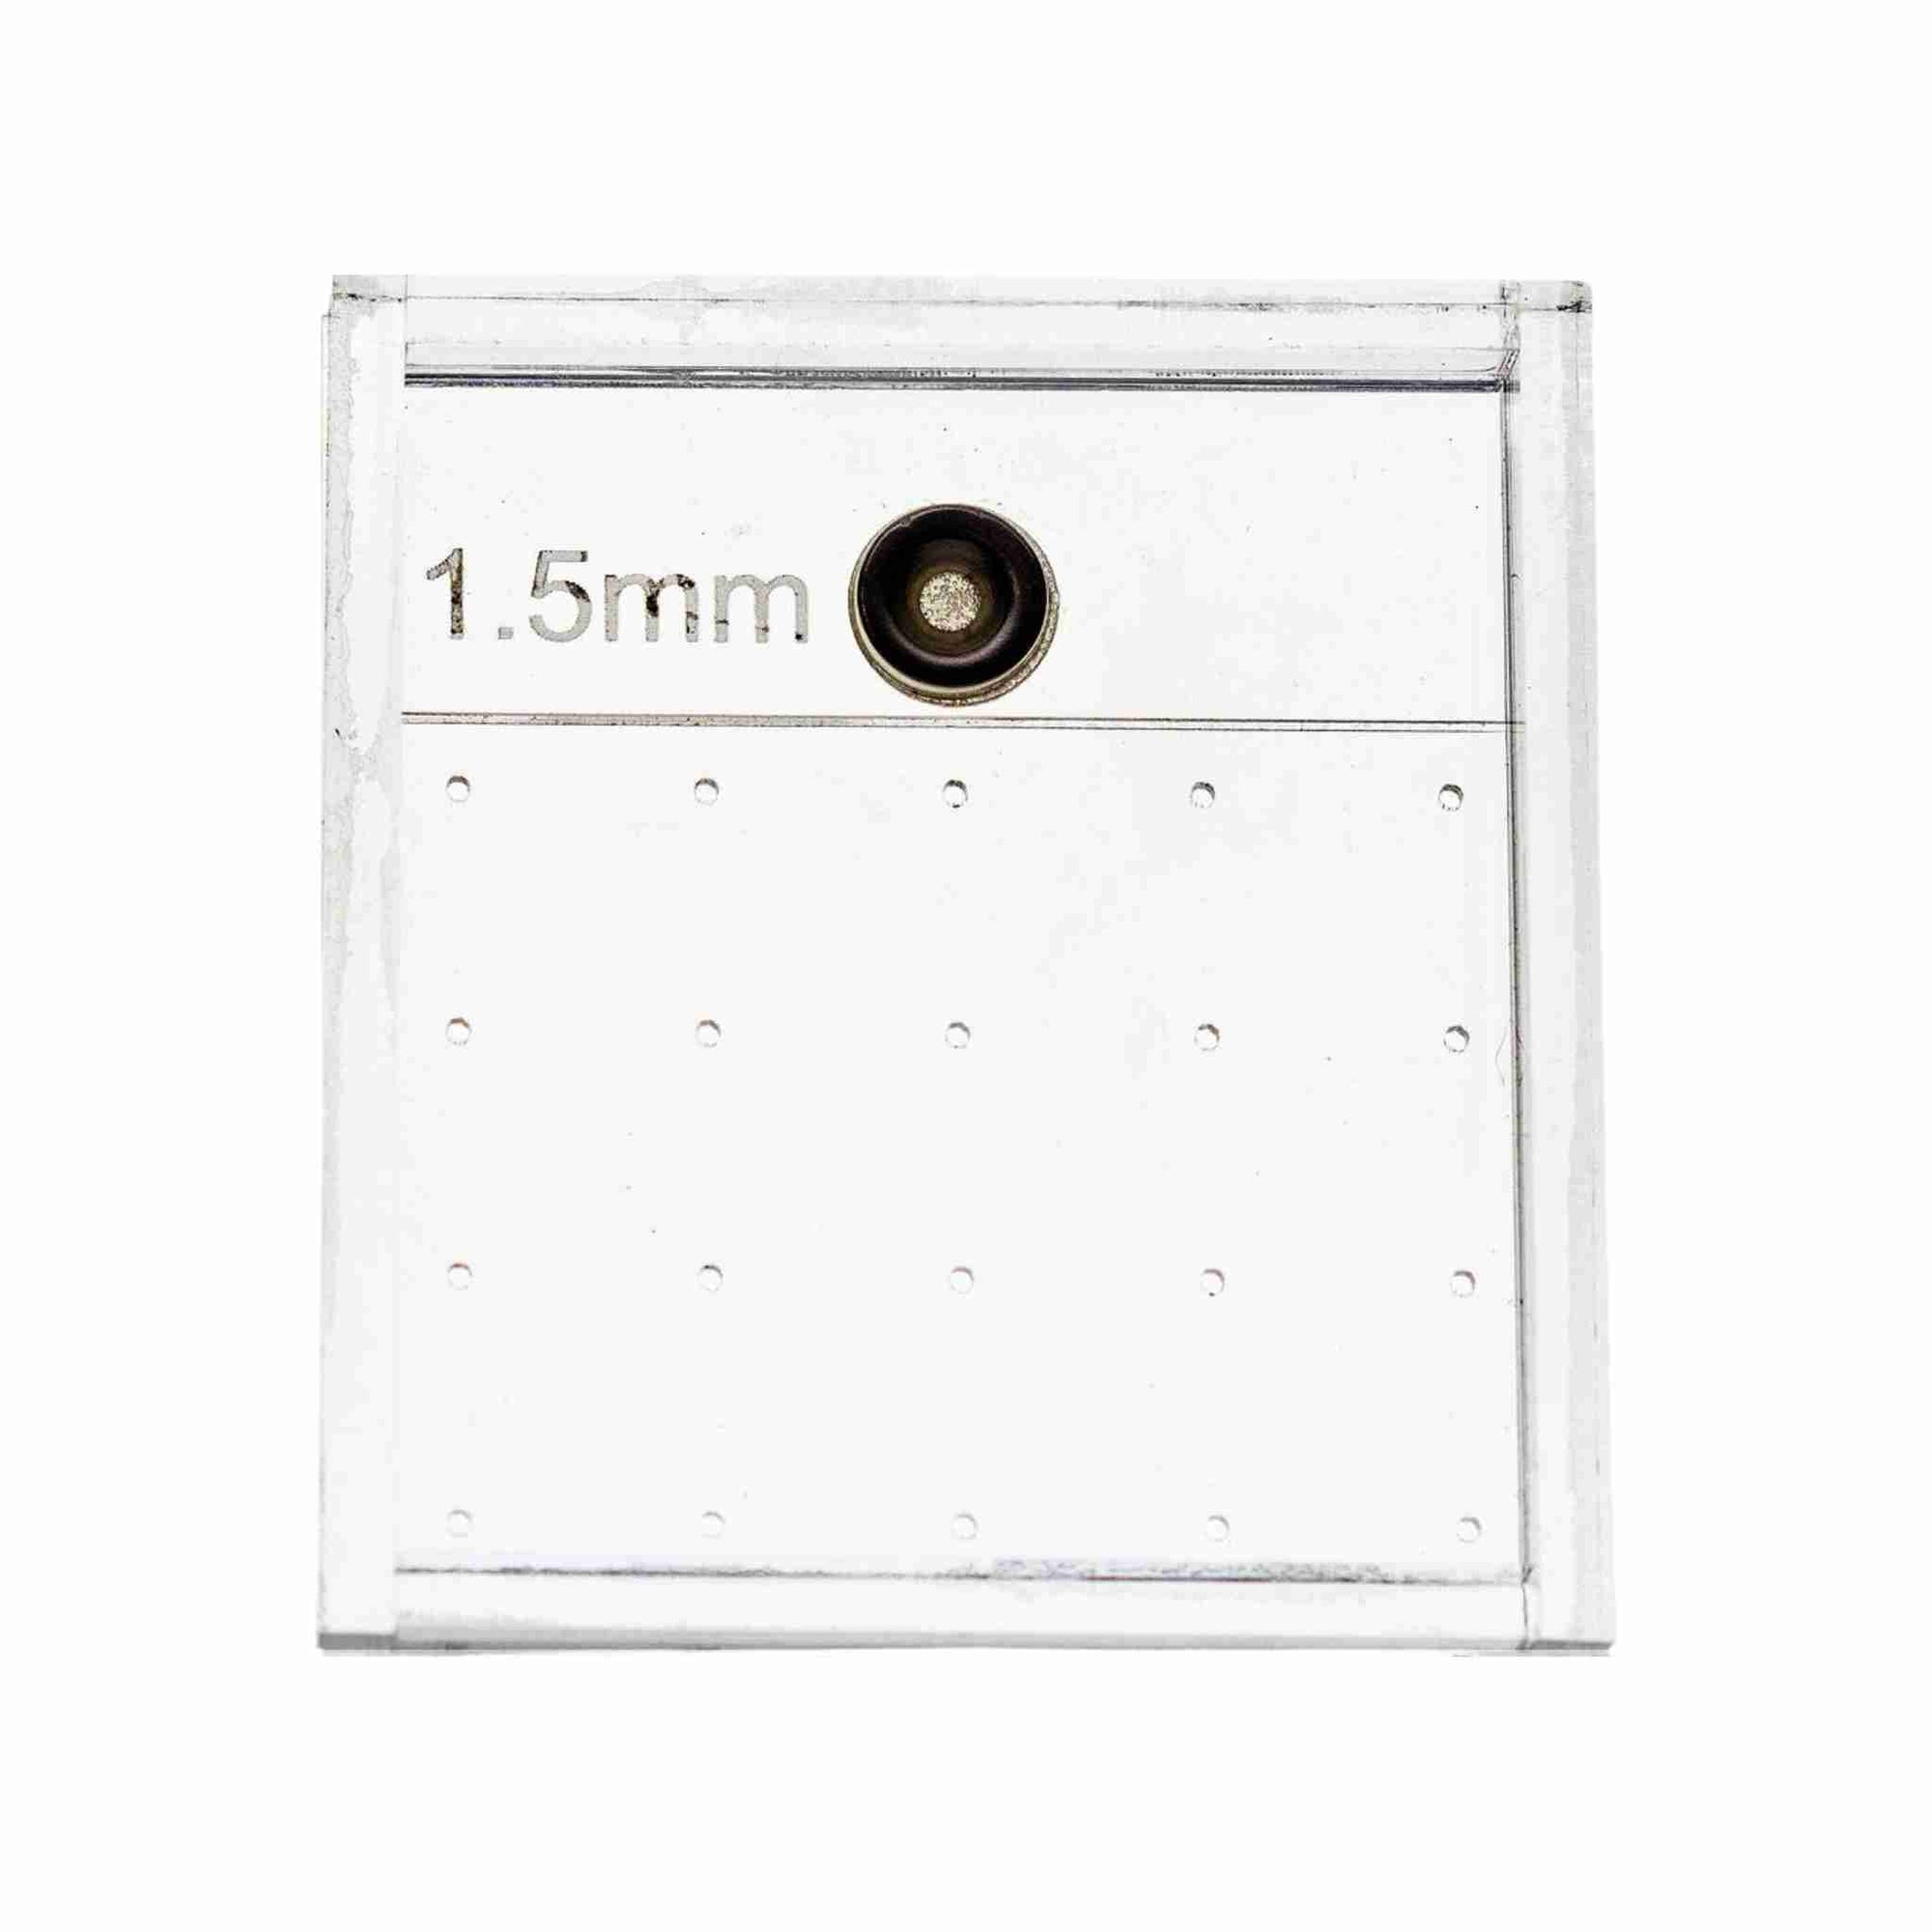 1.5 MM Drop Seeder Plate from Mindful Farmer